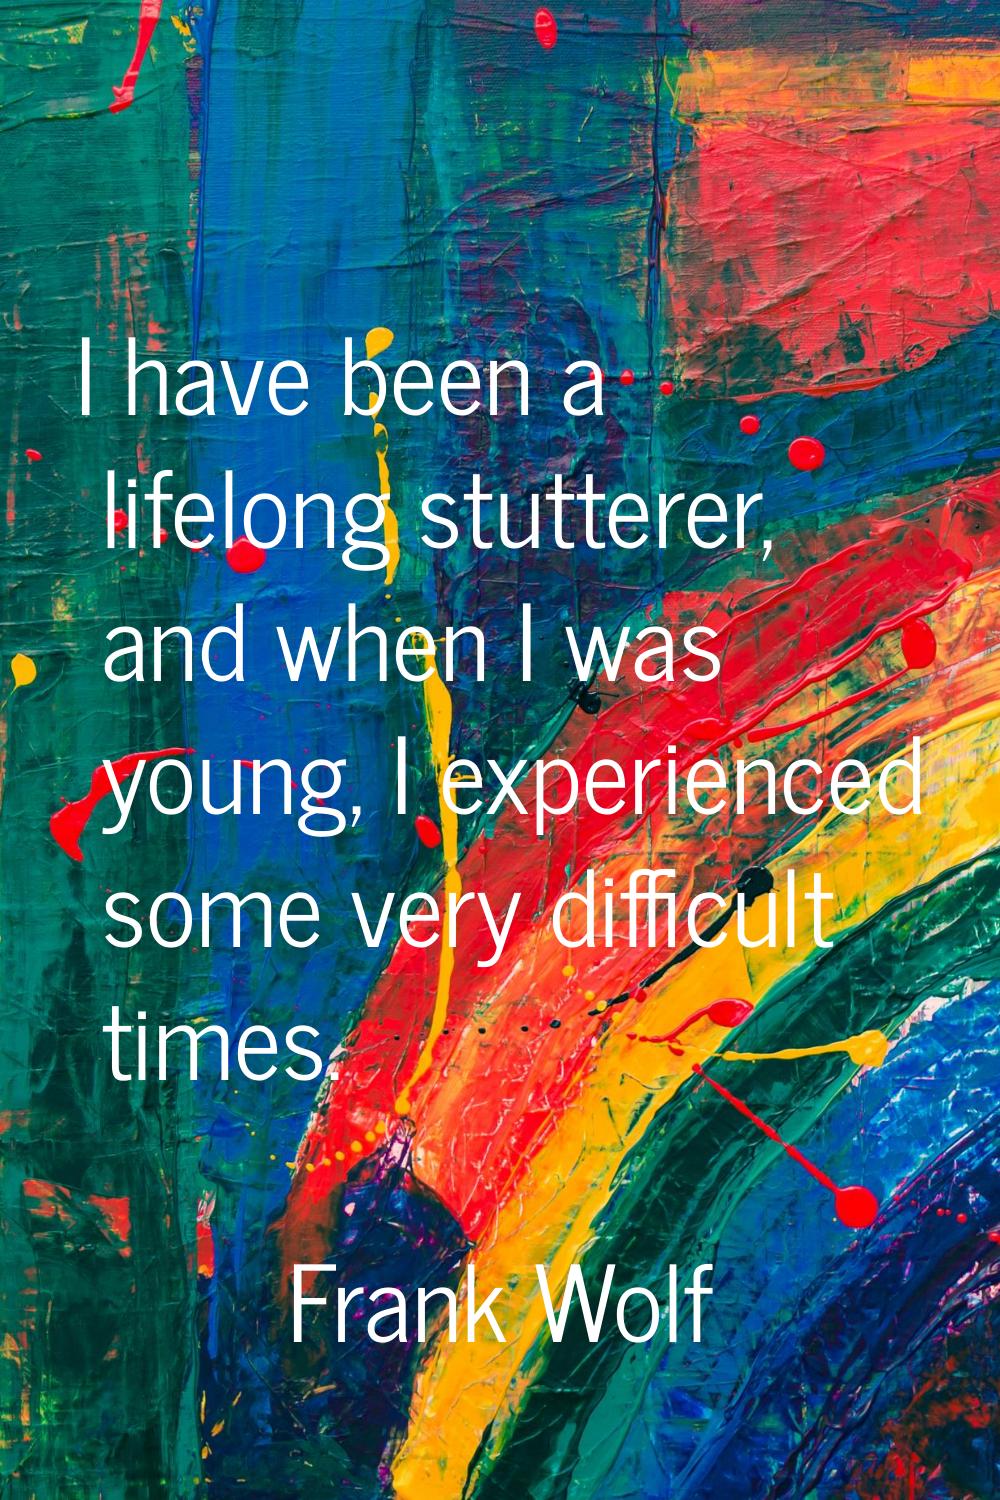 I have been a lifelong stutterer, and when I was young, I experienced some very difficult times.